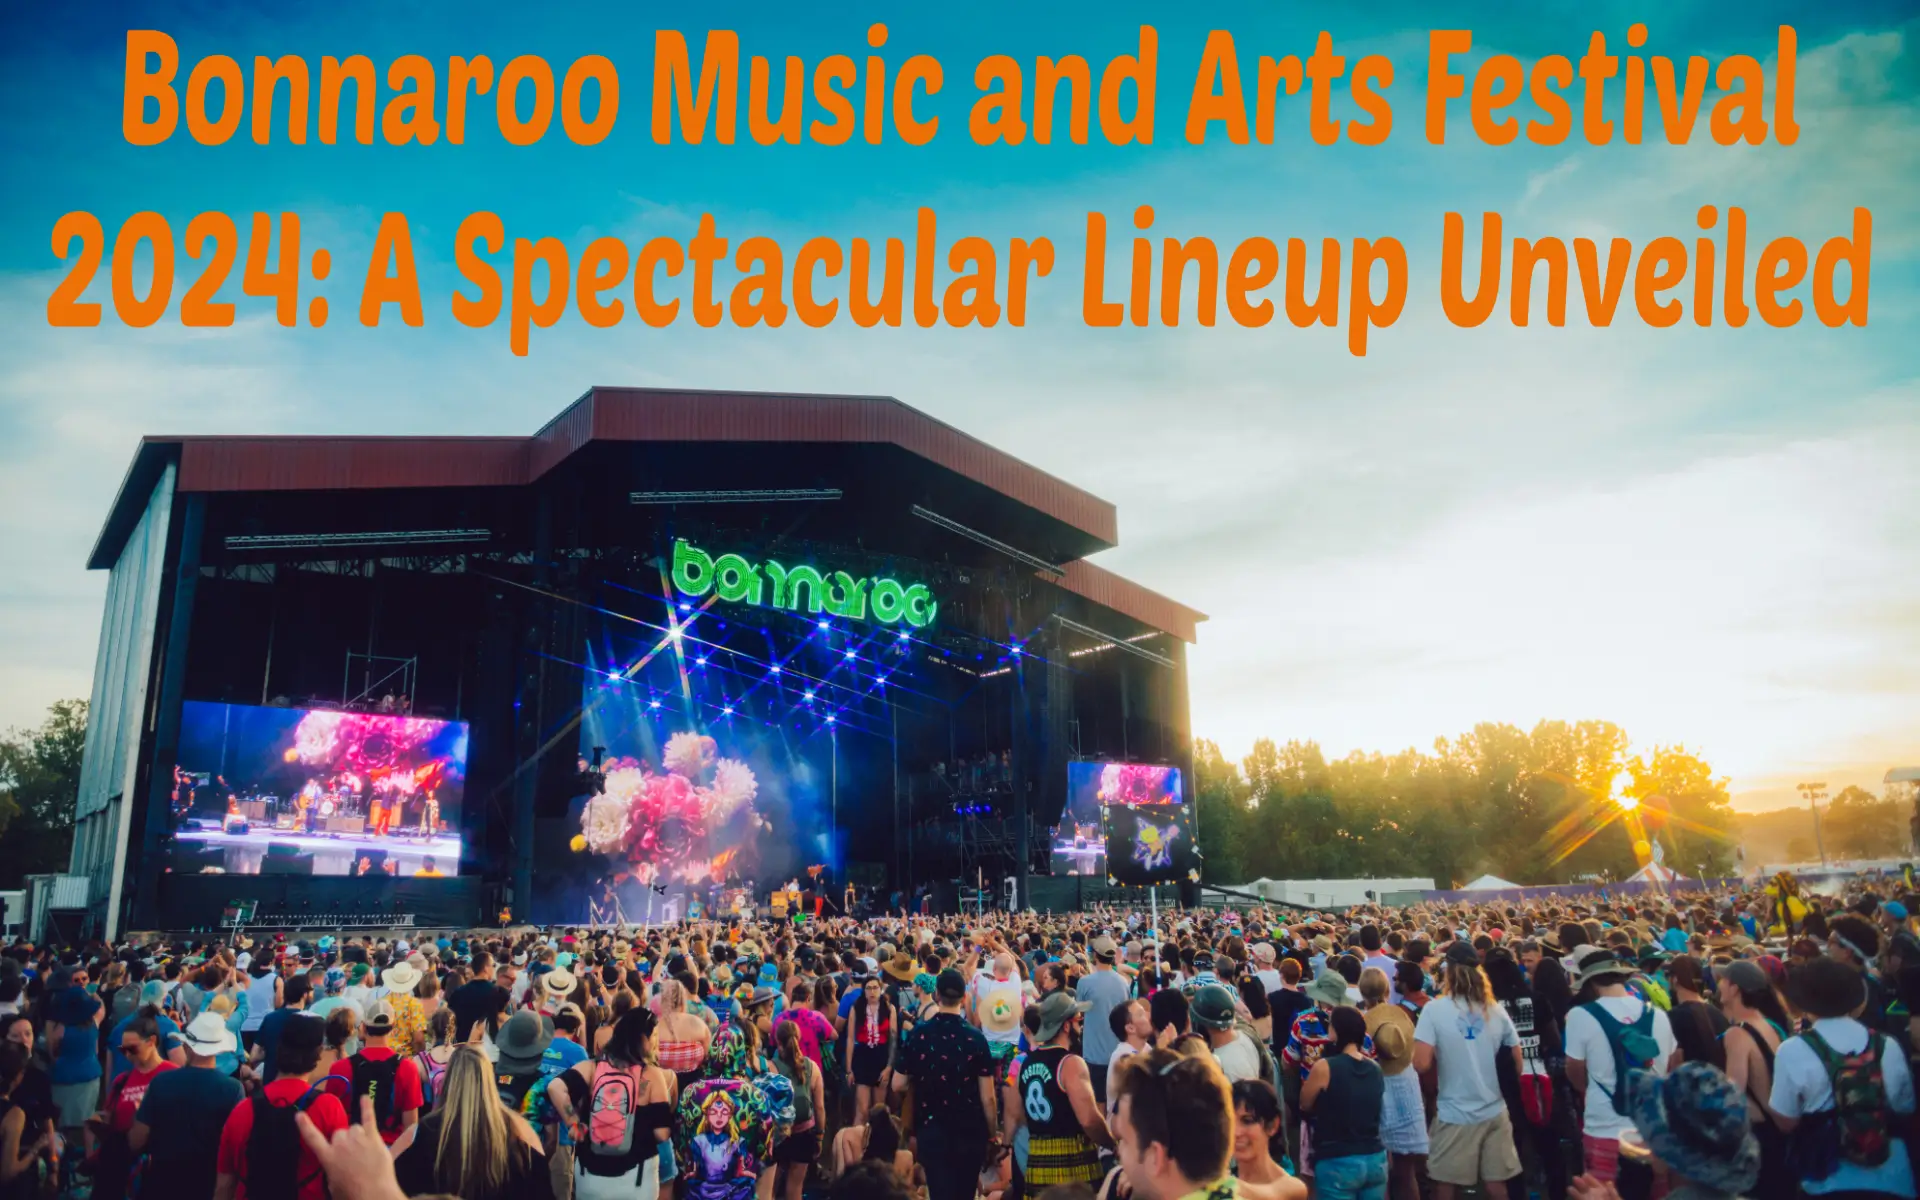 Bonnaroo Music and Arts Festival 2024: A Spectacular Lineup Unveiled